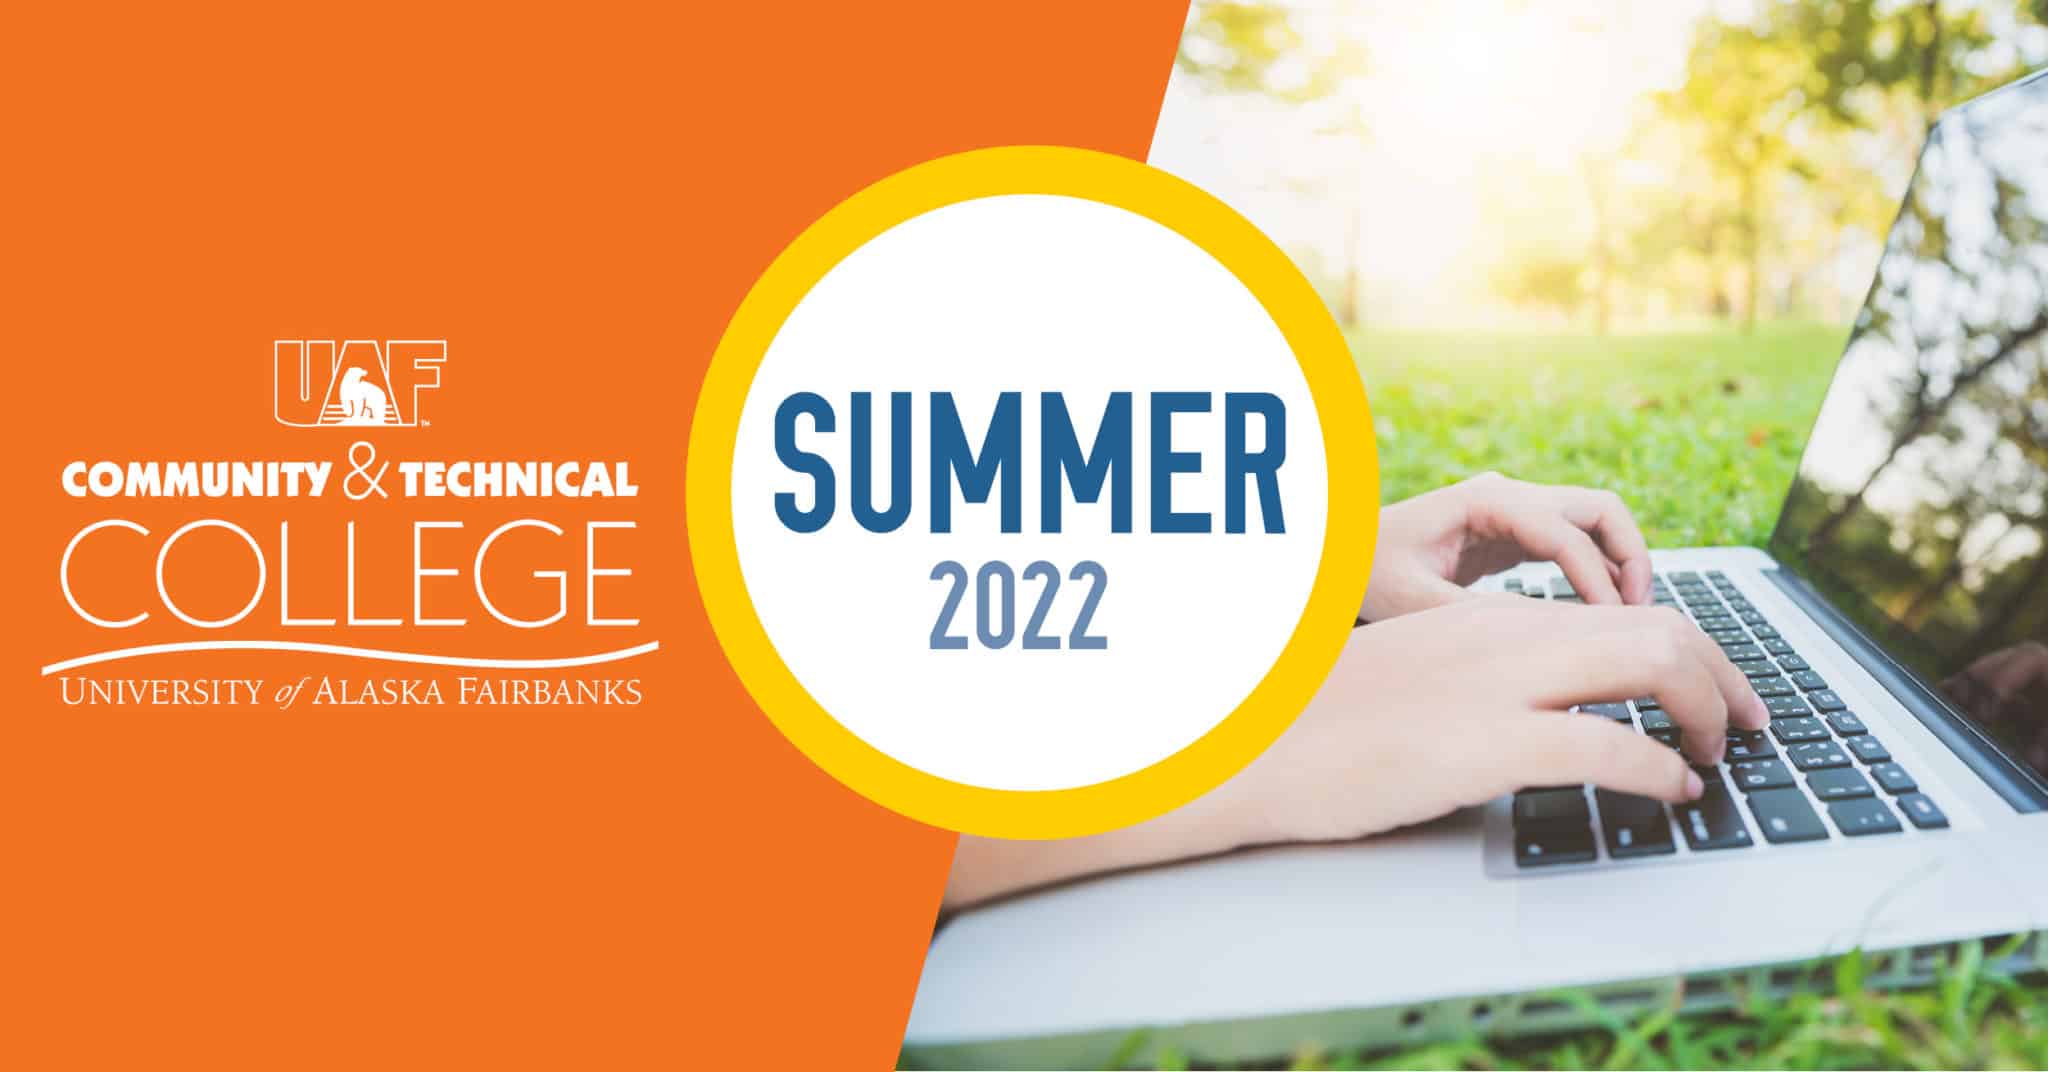 Register for Summer 2022 courses at CTC UAF Community & Technical College